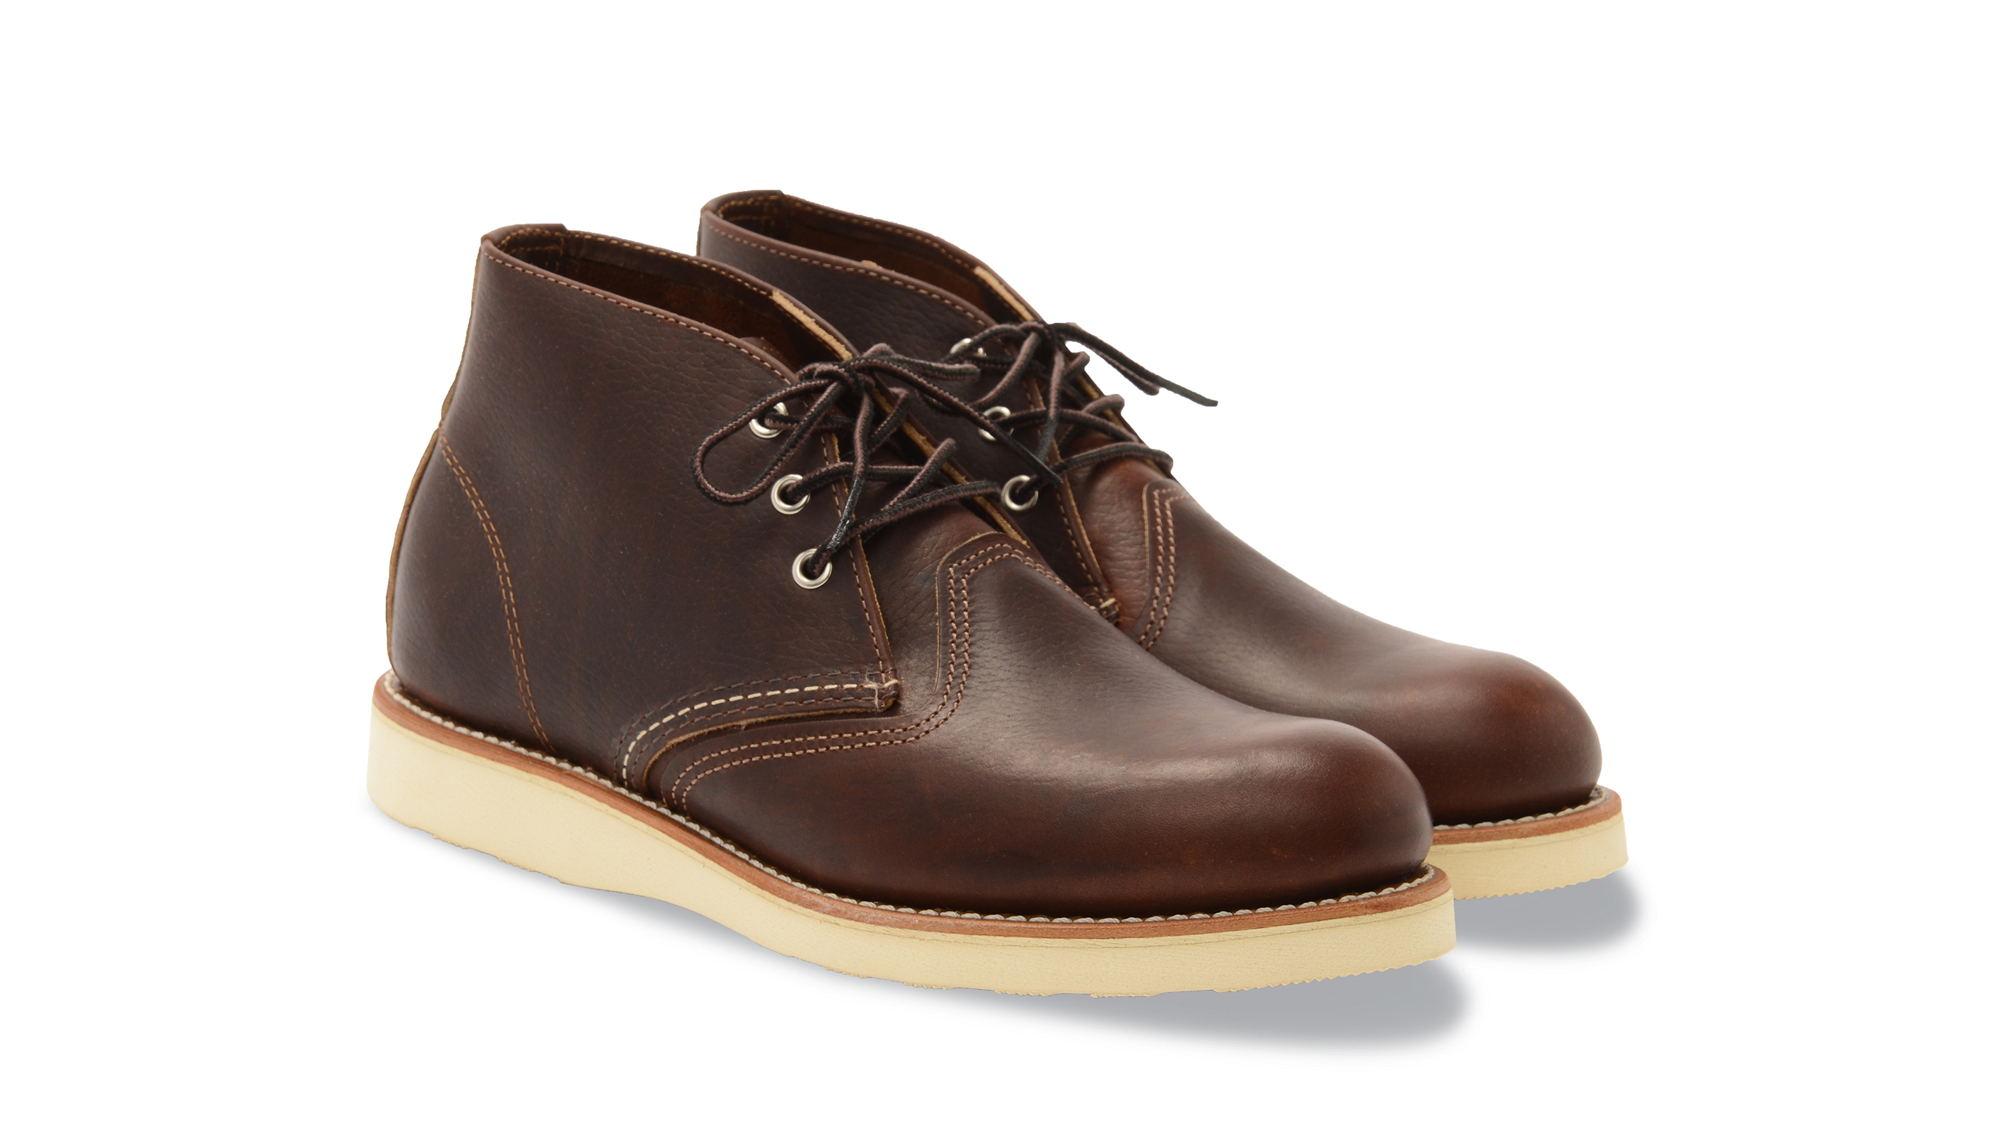 Shop the Work Chukka 3141 | Official Red Wing Shoes Online Store